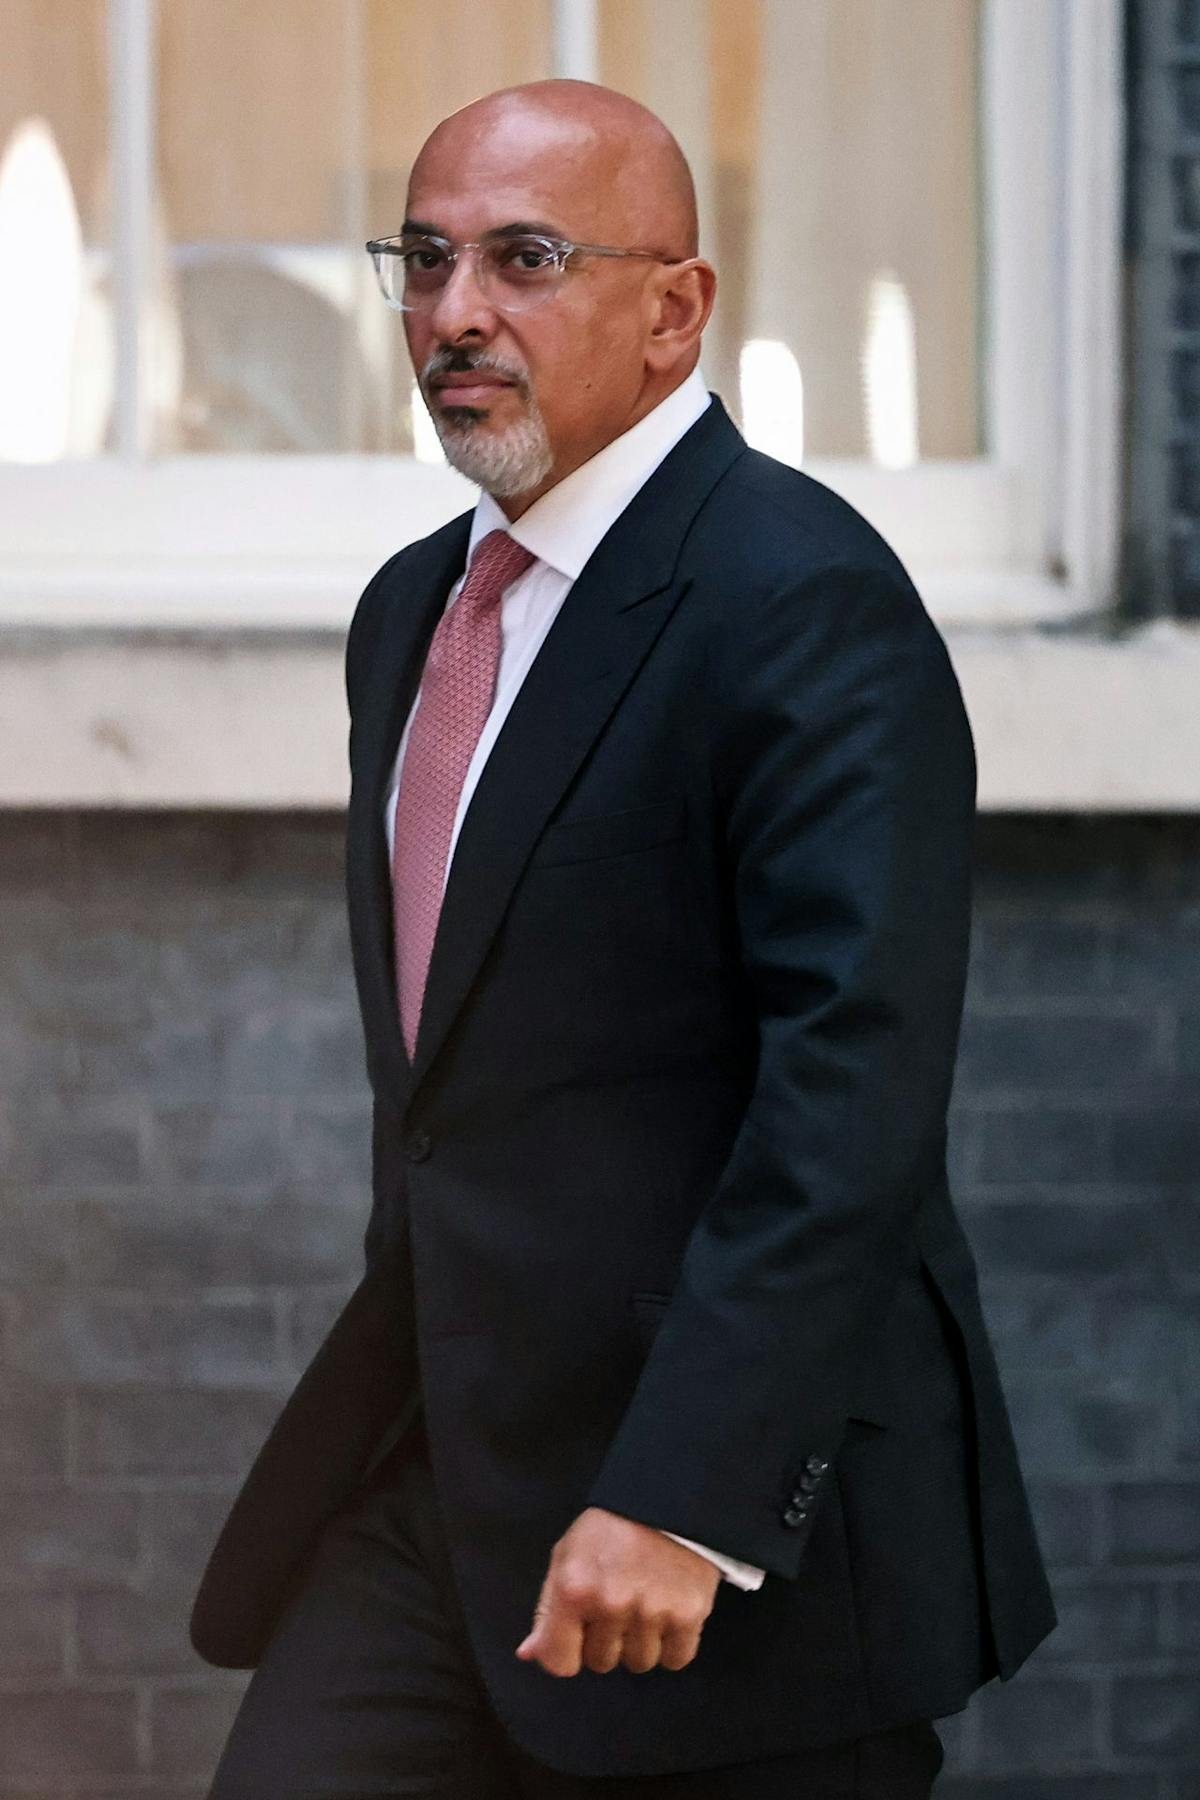 Liz Truss: why Nadhim Zahawi's new role is problematic